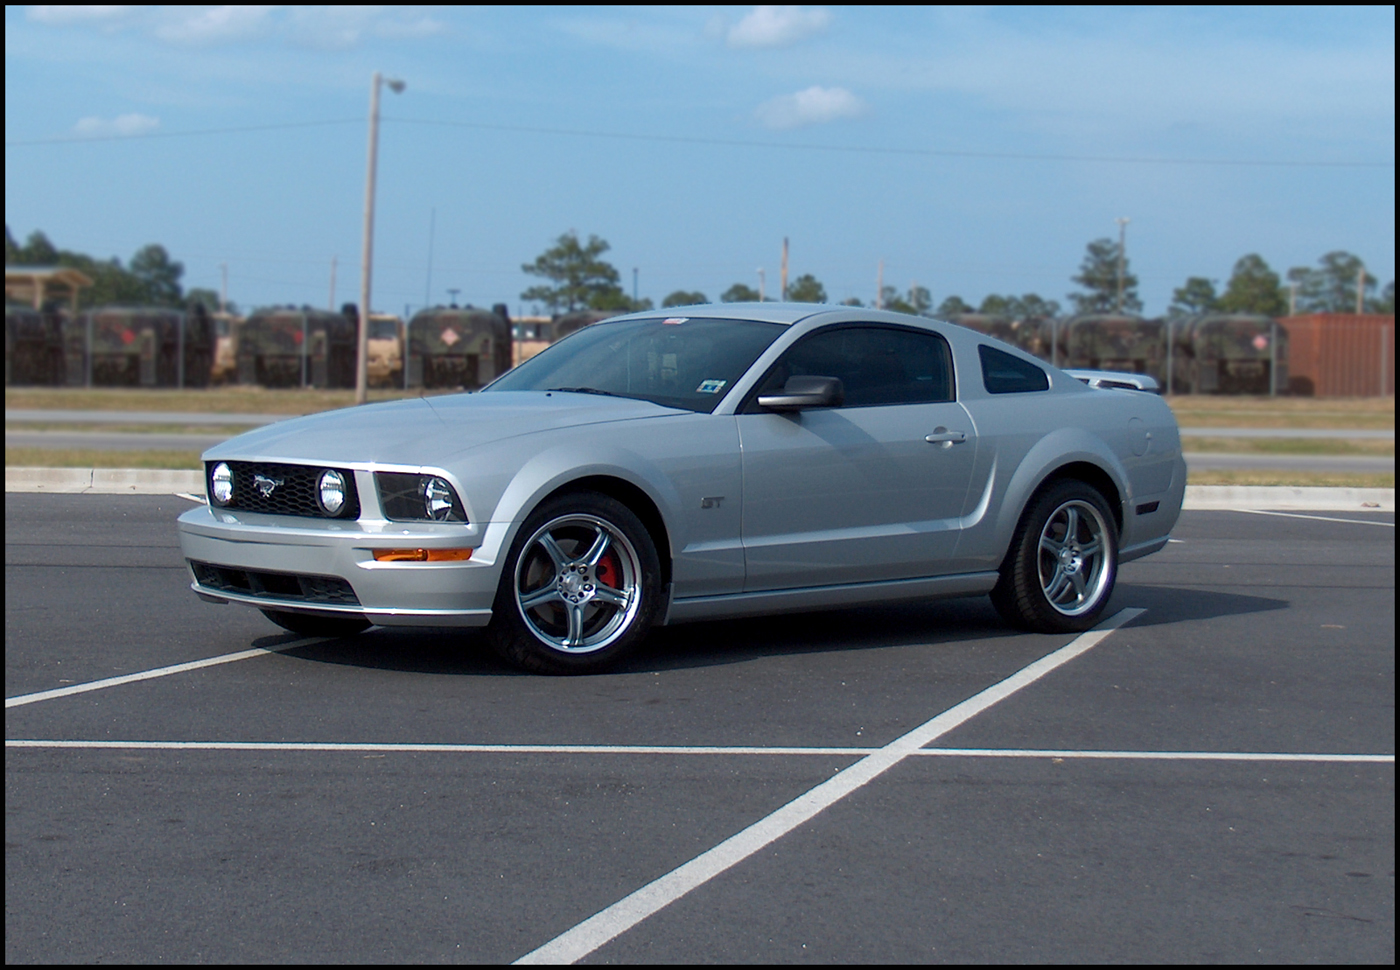 2005 Ford mustang 0-60